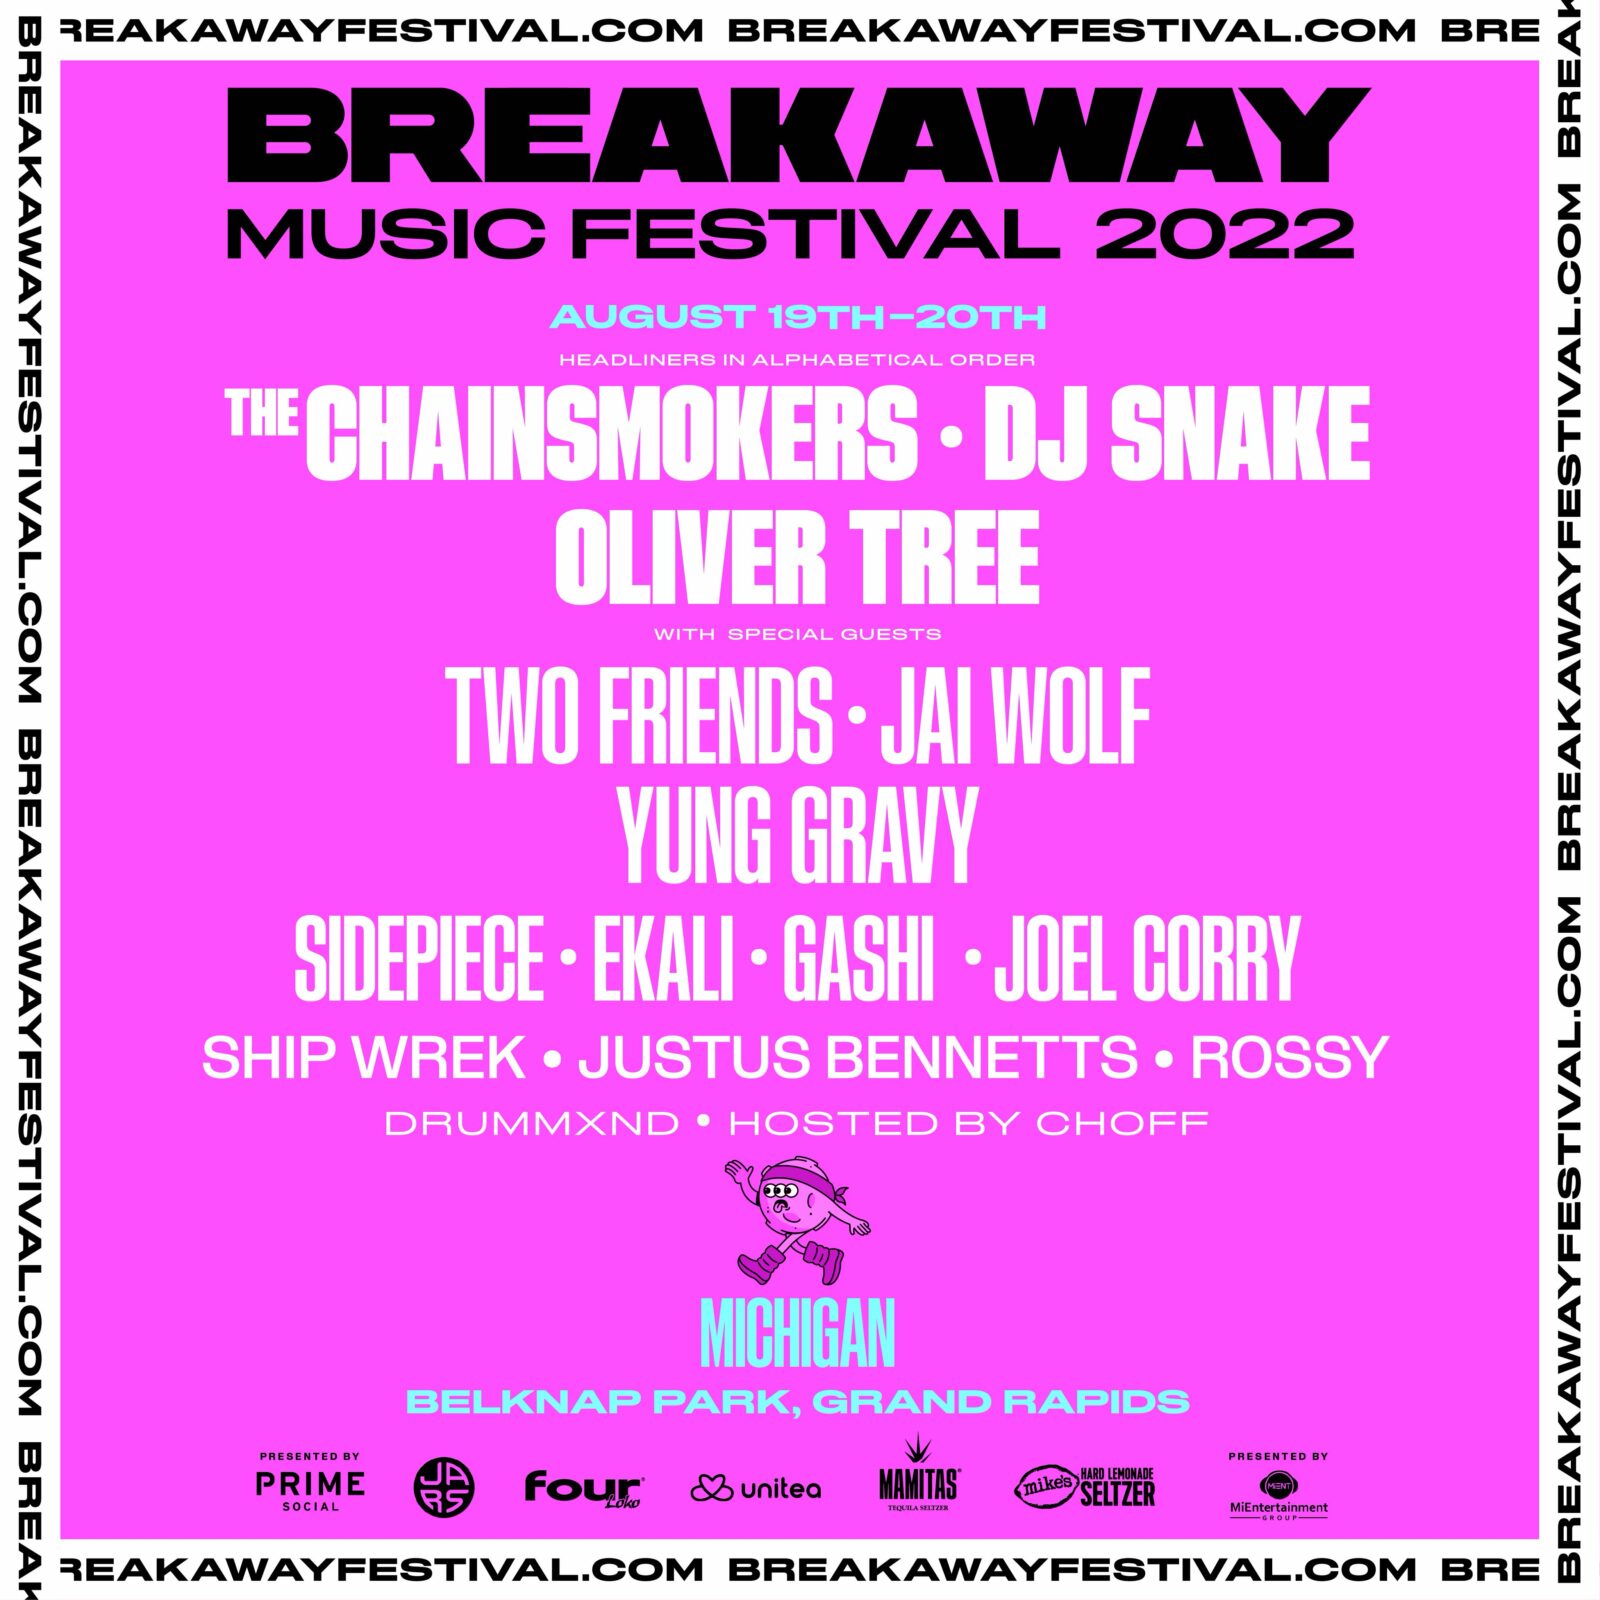 How to Find The Cheapest Breakaway Festival Tickets + 2022 Lineups